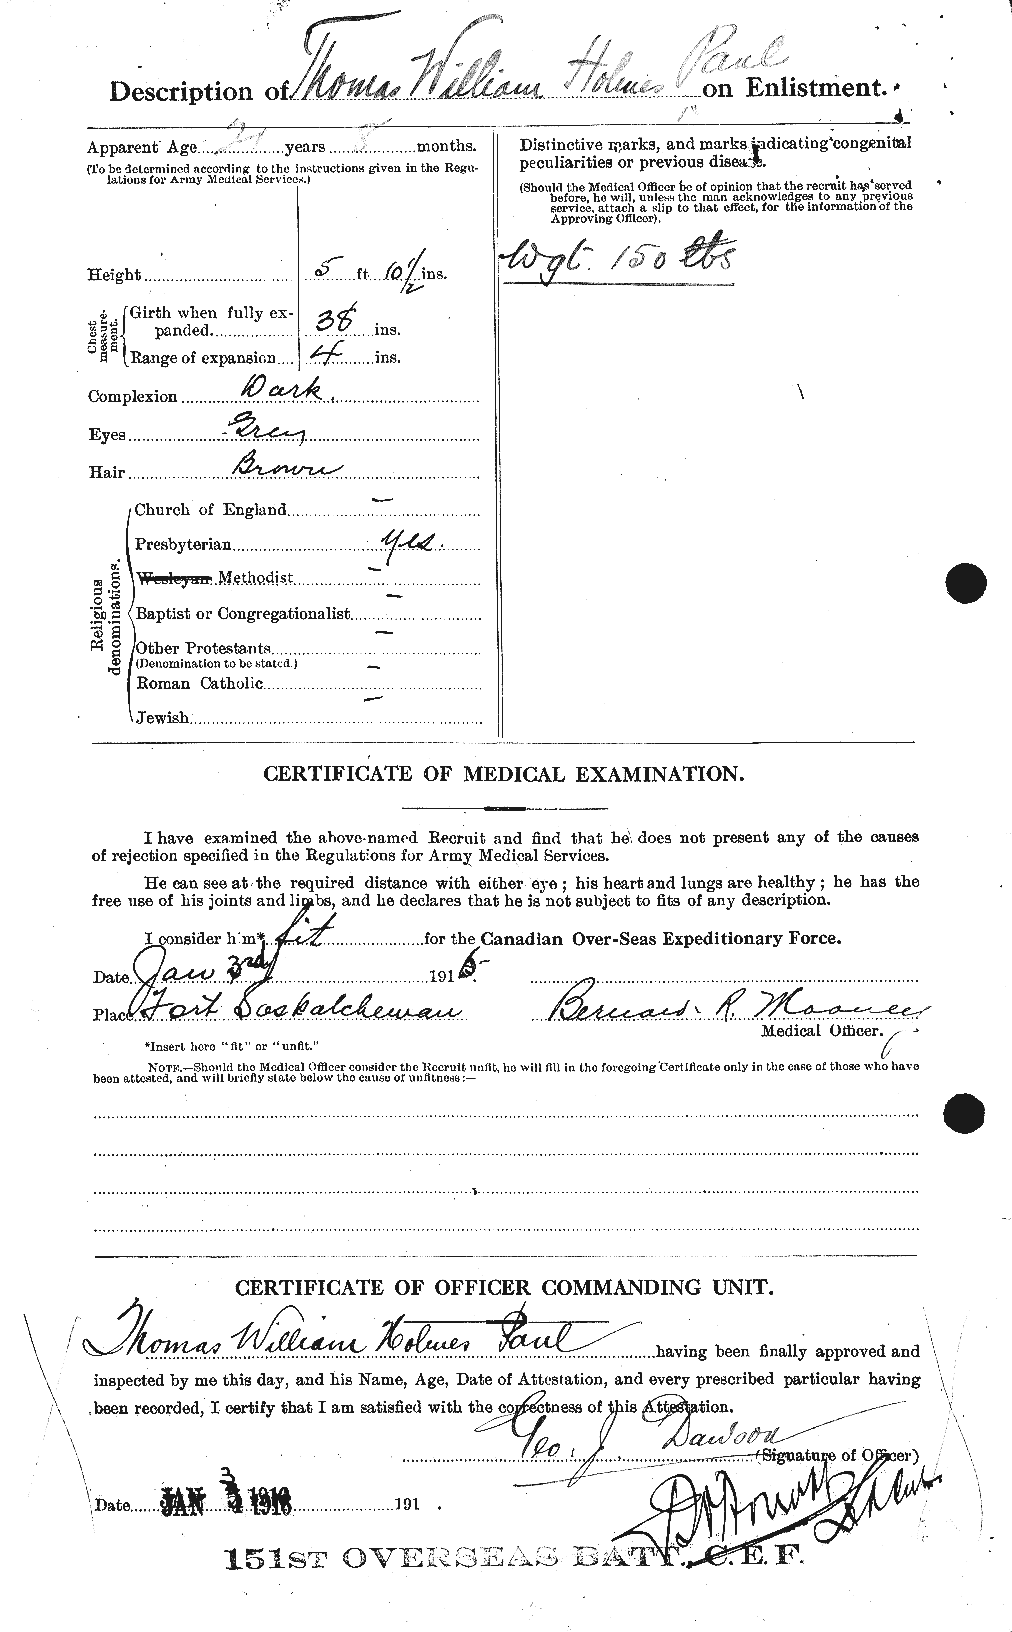 Personnel Records of the First World War - CEF 569351b